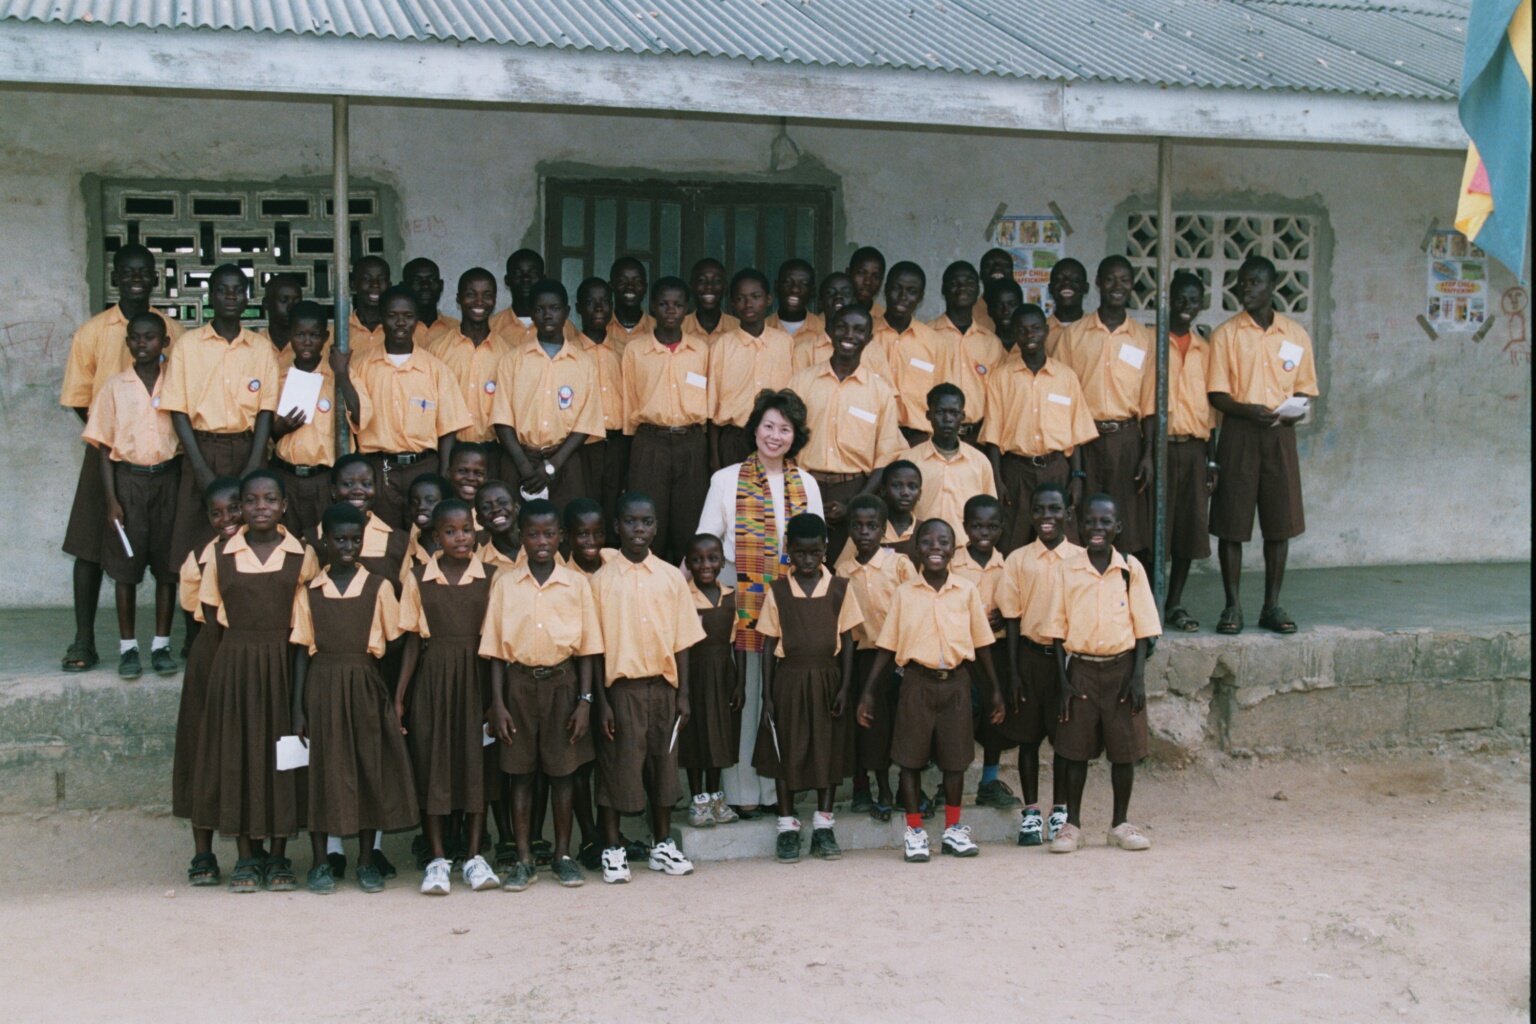 Secretary Elaine Chao visiting a department funded project for trafficked children in Krokrobite Village outside Accra, Ghana.